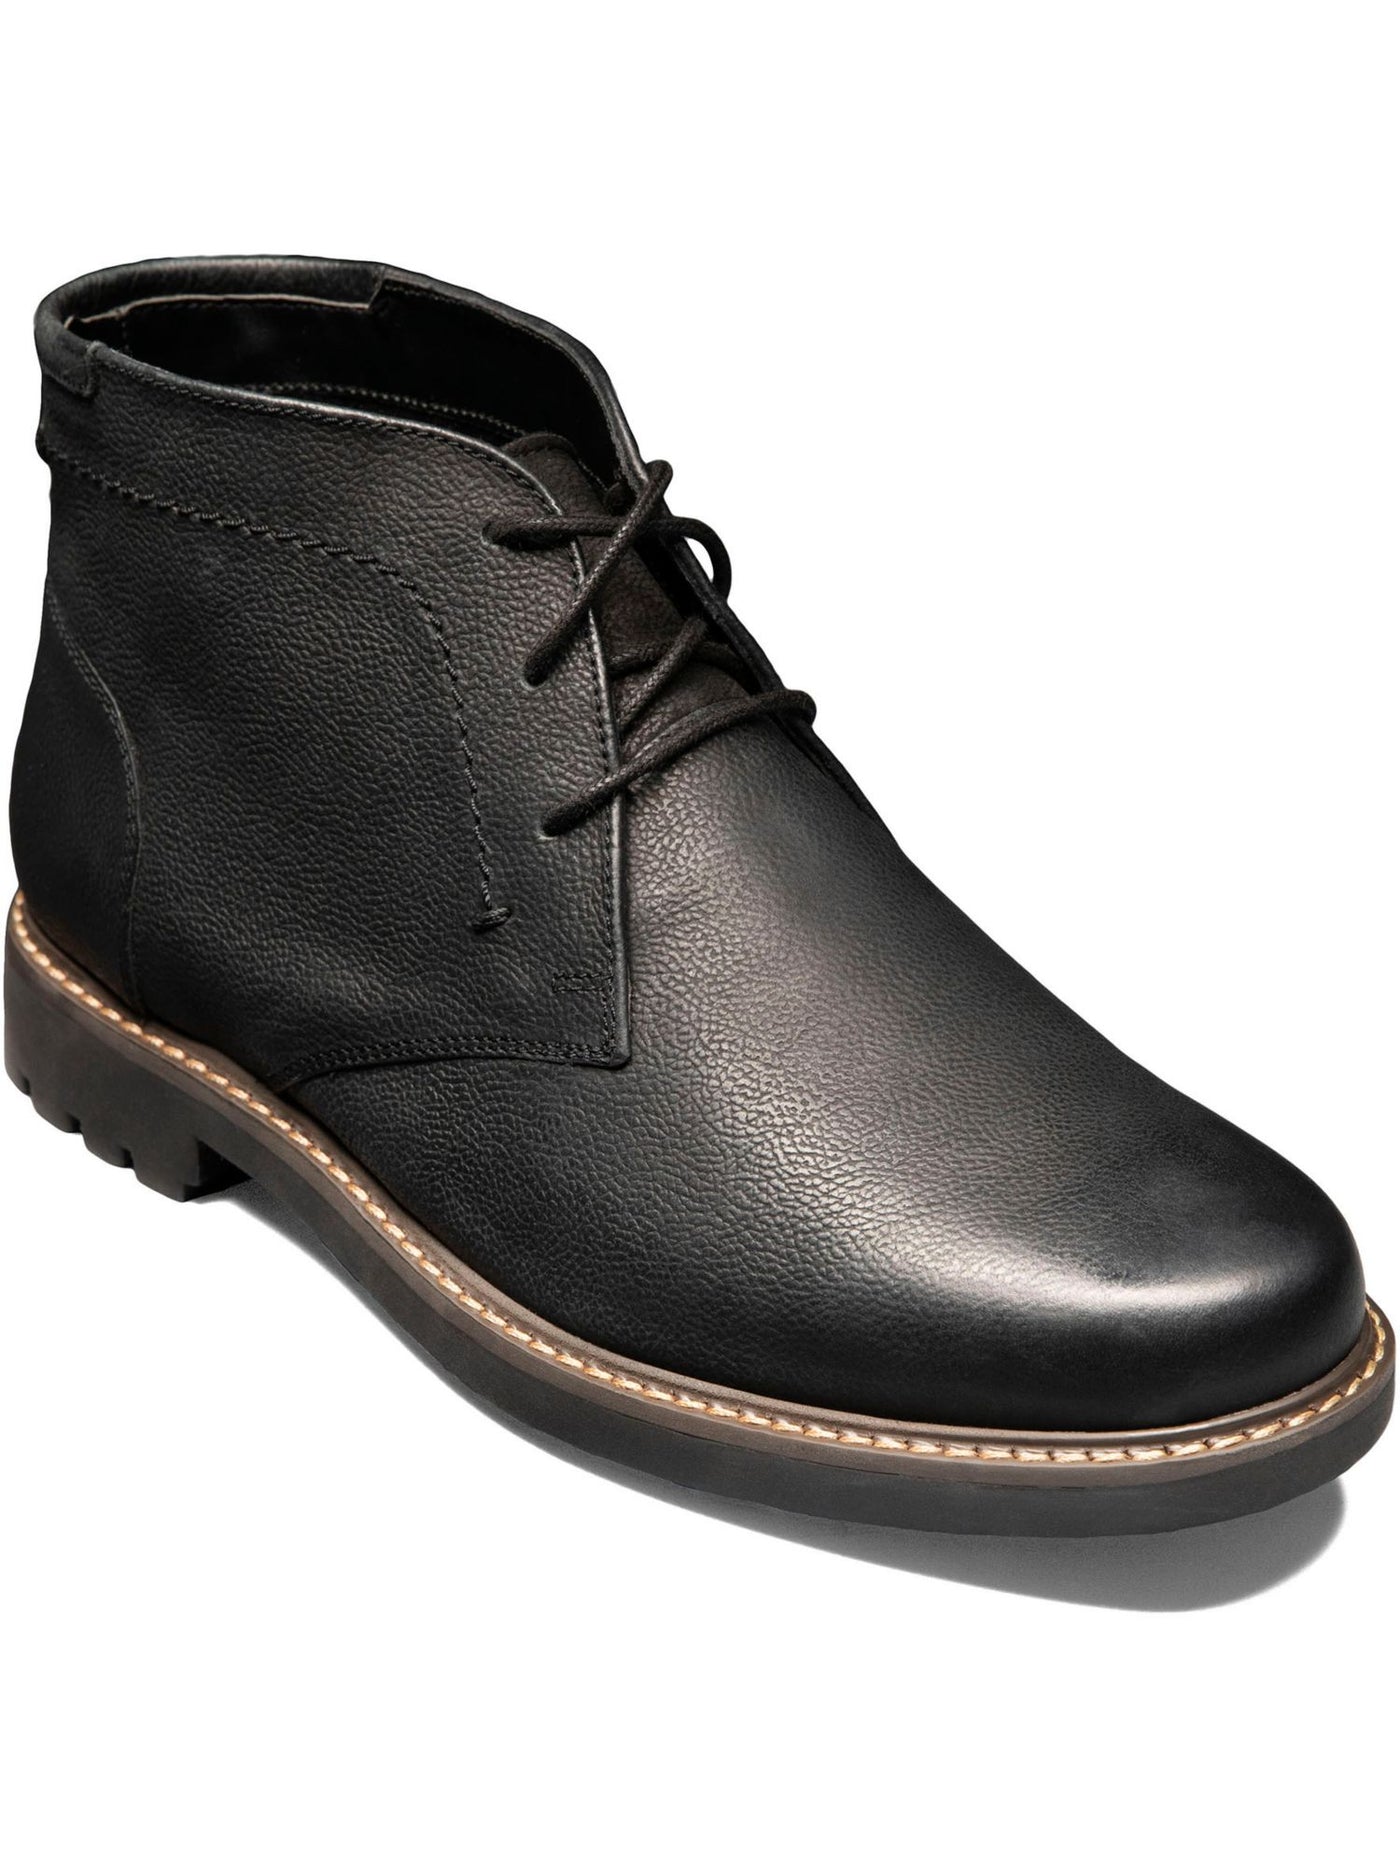 FLORSHEIM Mens Black Lug Sole Removable Insole Field Round Toe Block Heel Lace-Up Leather Chukka Boots 10 M